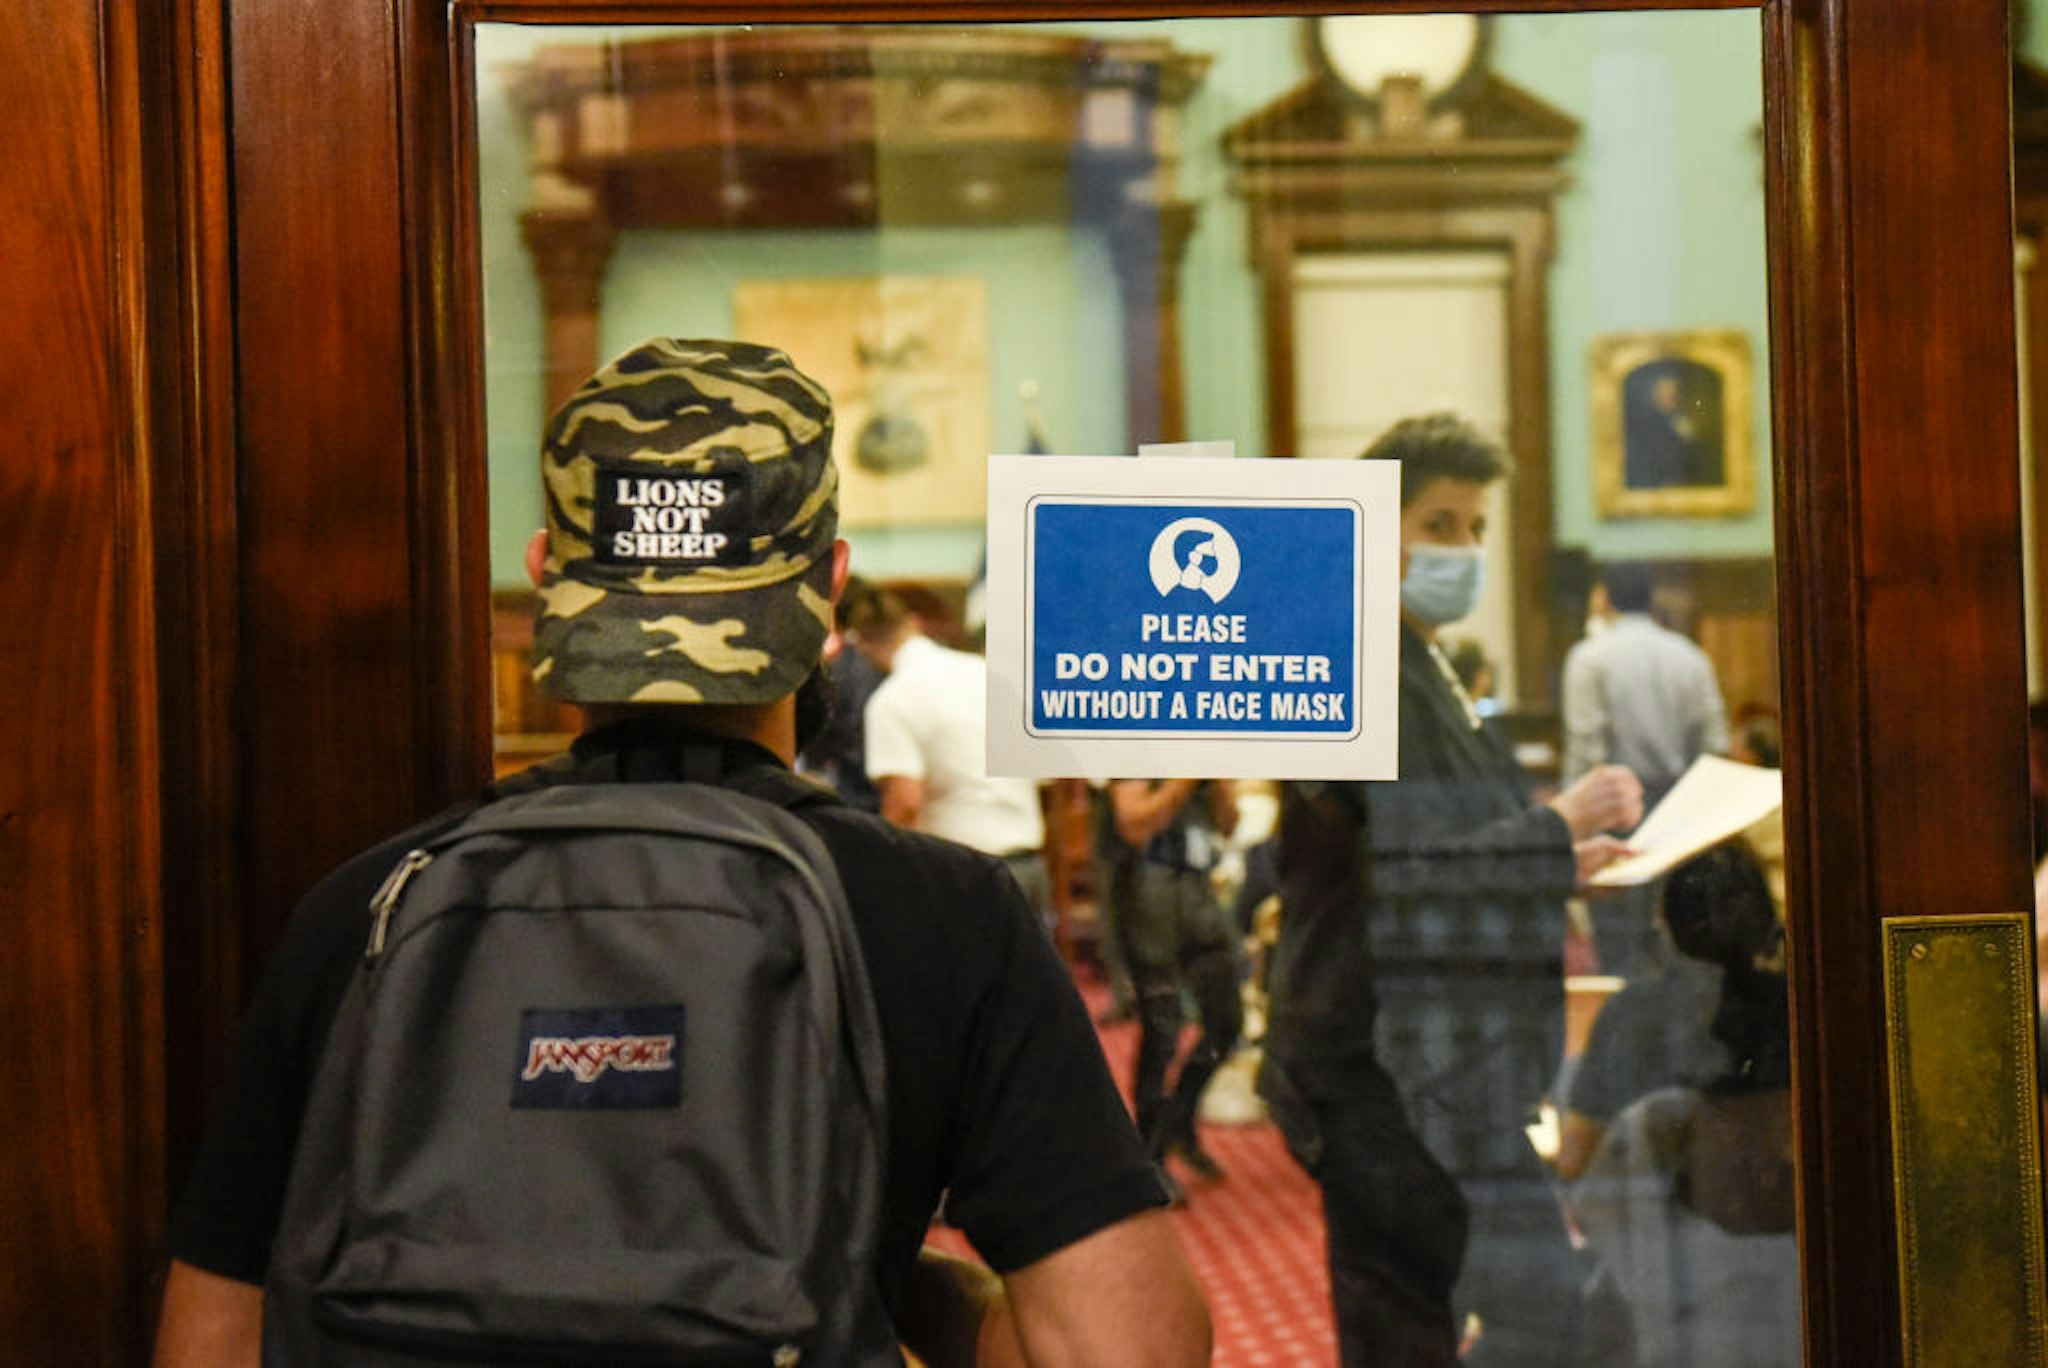 A visitor tries to enter without wearing a protective during a New York City Council hearing on Mayor Bill de Blasio's back-to-school plans in New York, U.S., on Wednesday, Sept. 1, 2021. New York City Council members confronted Mayor Bill de Blasio's top school and health officials Wednesday with concerns raised by educators and parents who say the citys back-to-school preparations remain fraught with uncertainty. 